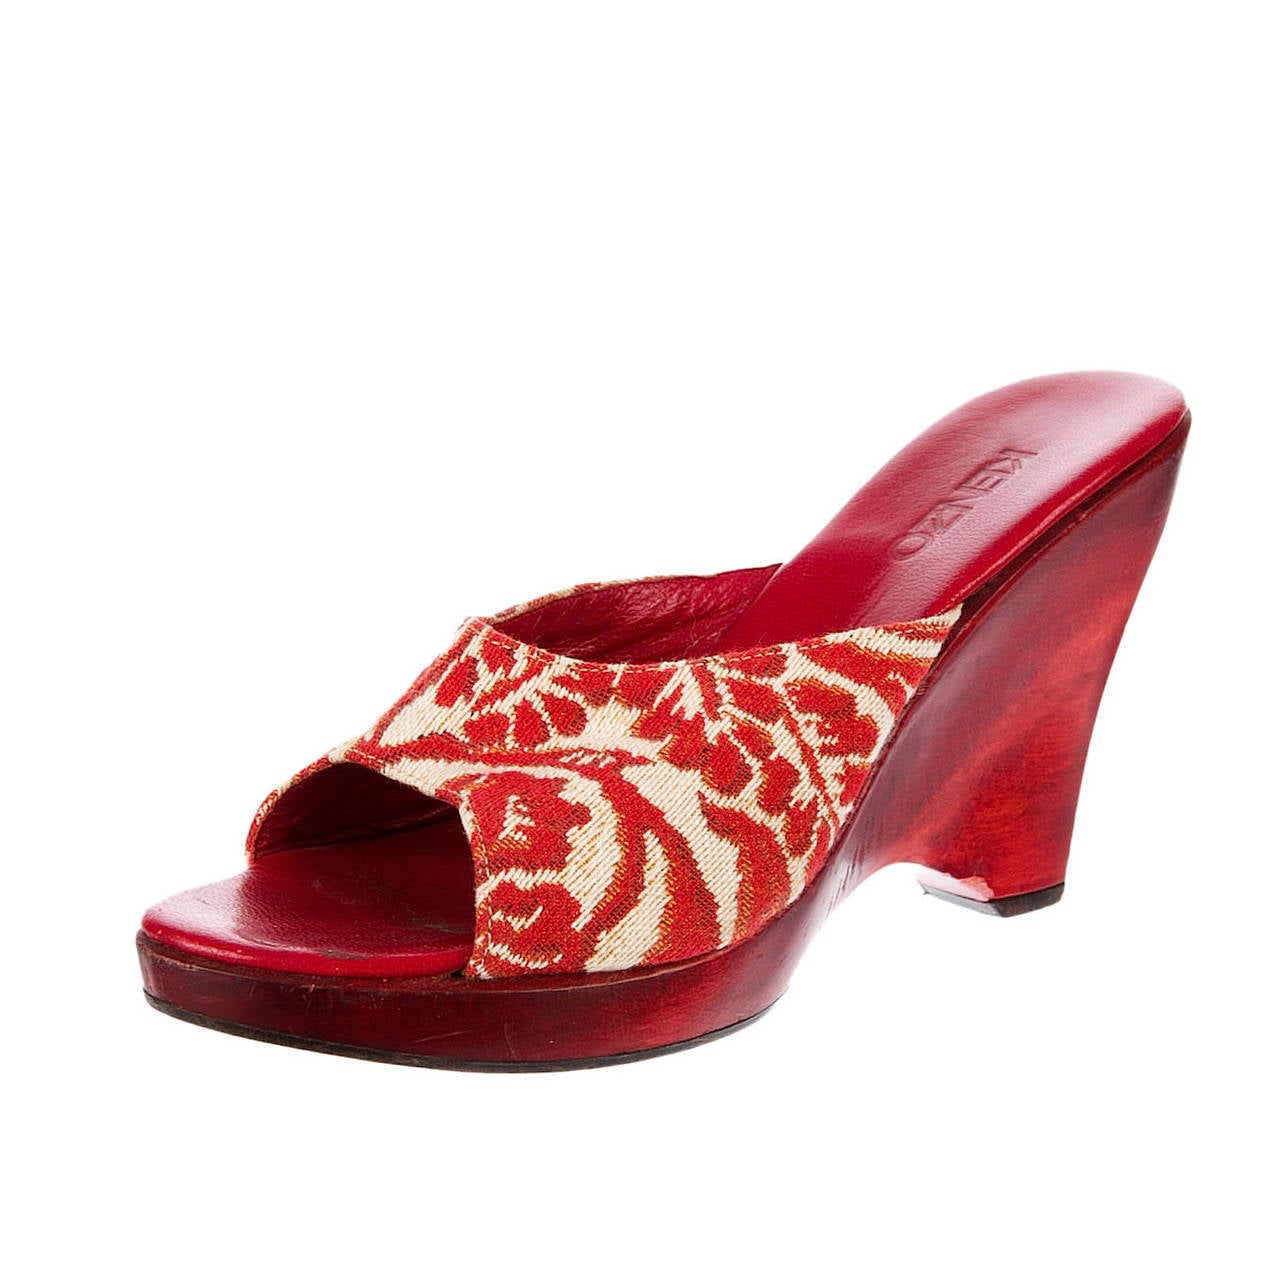 Kenzo Platform Clogs with Jacquard Uppers, IT 39 For Sale